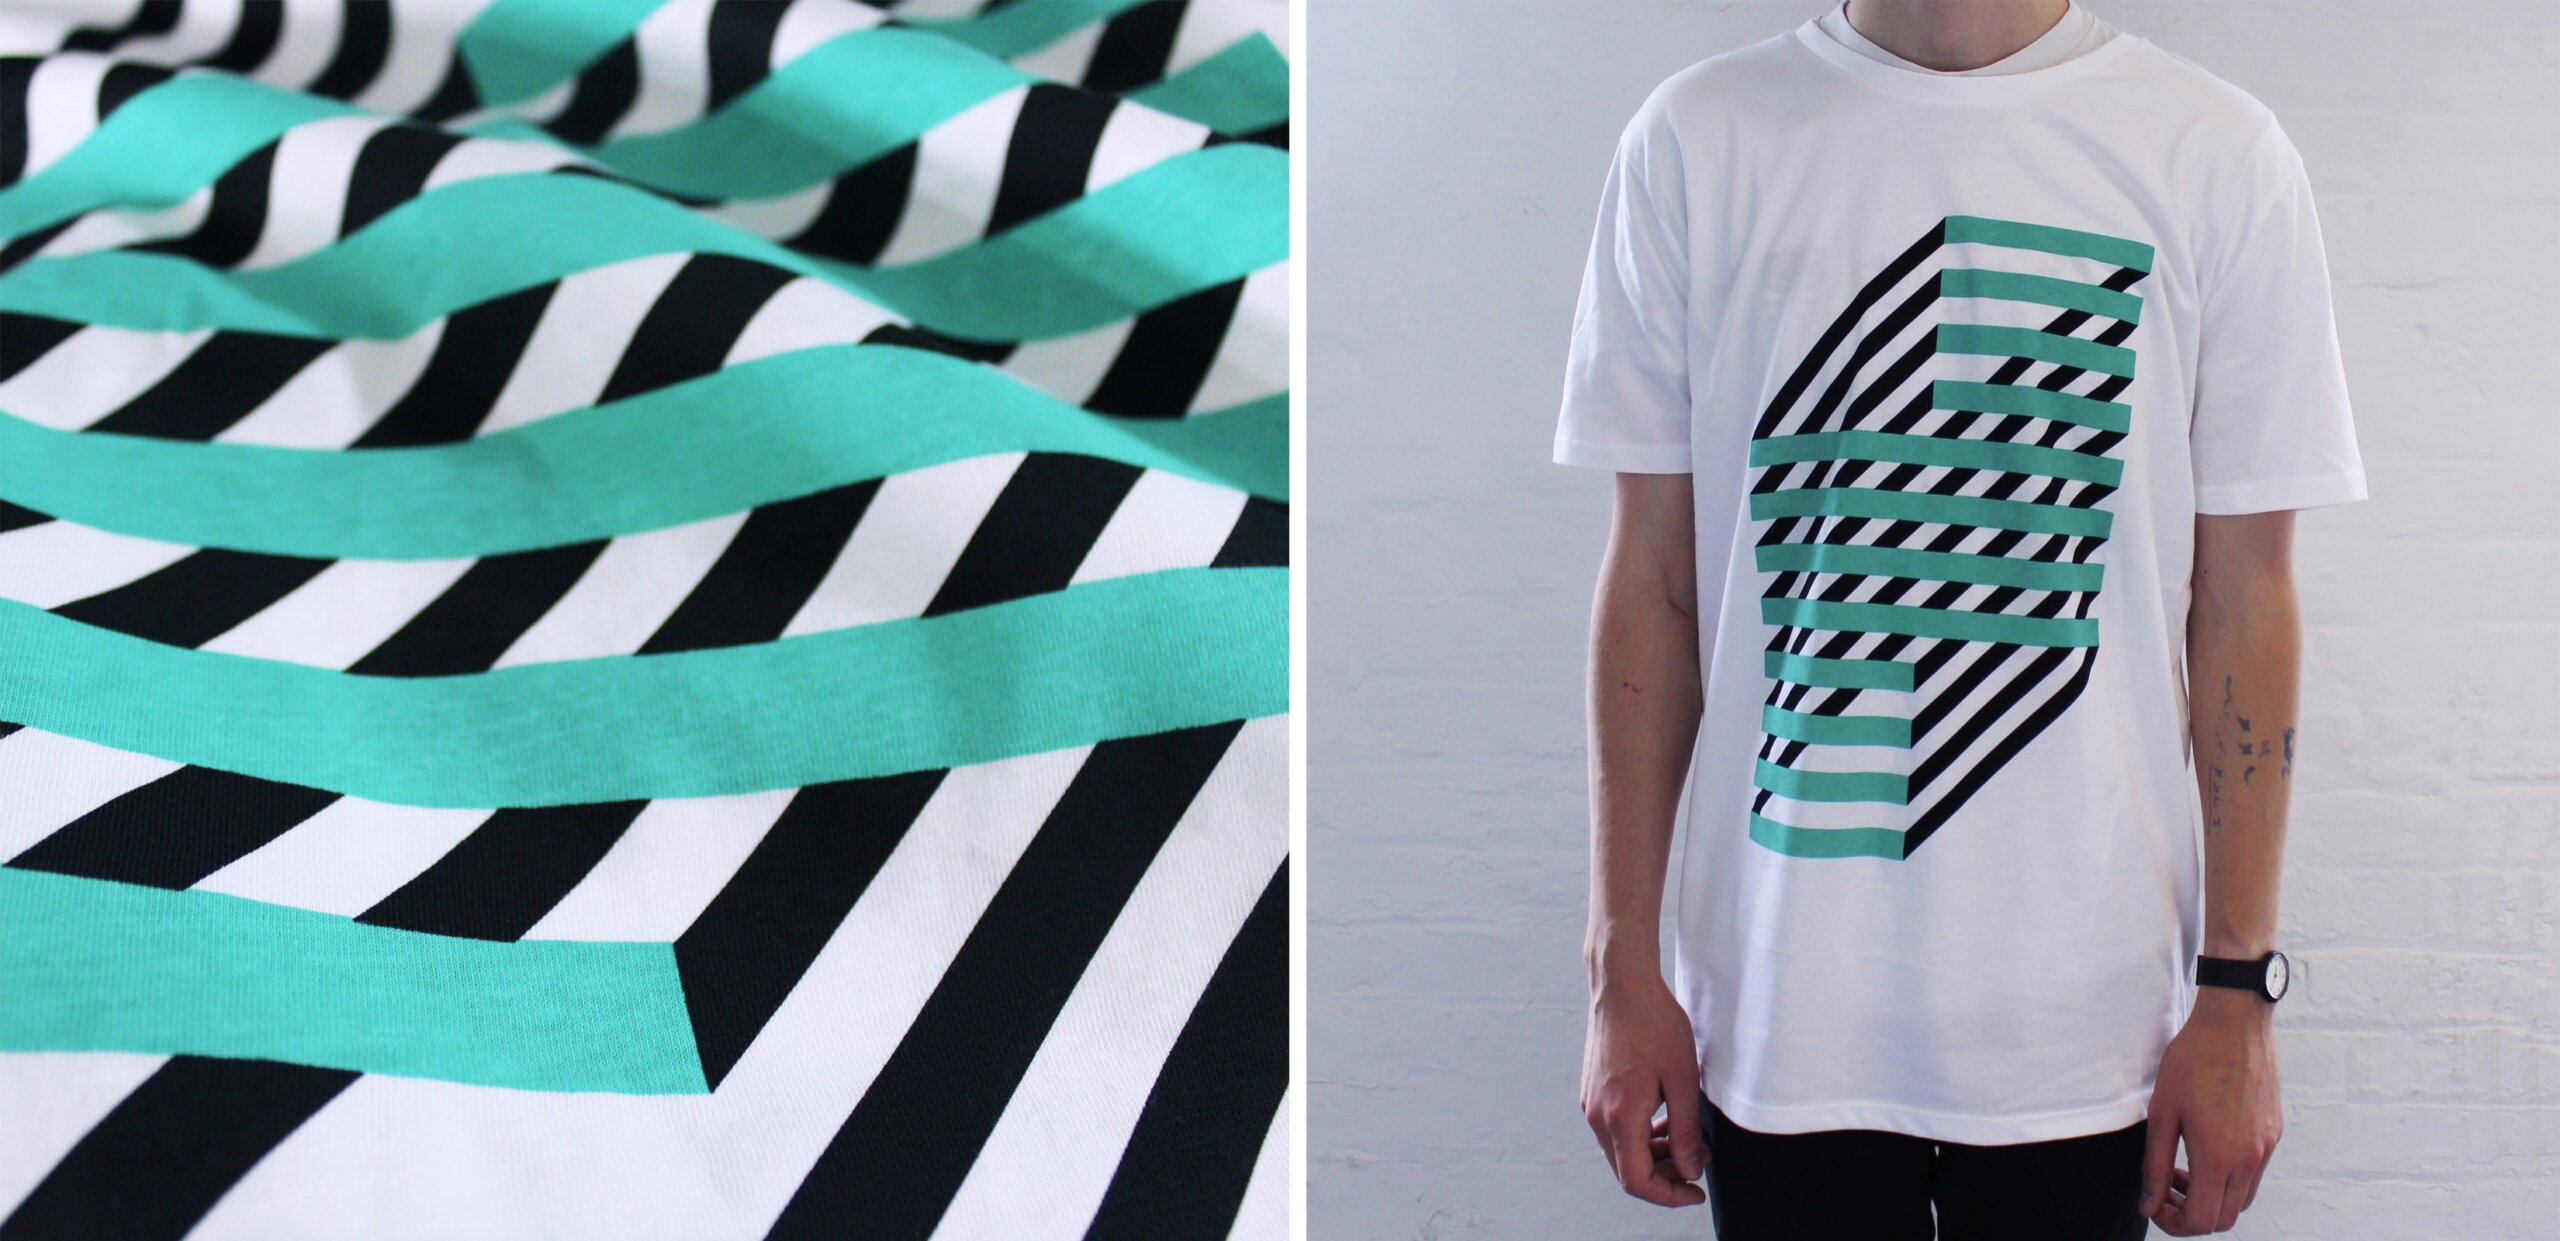 Screen printed t-shirt with graphic pattern